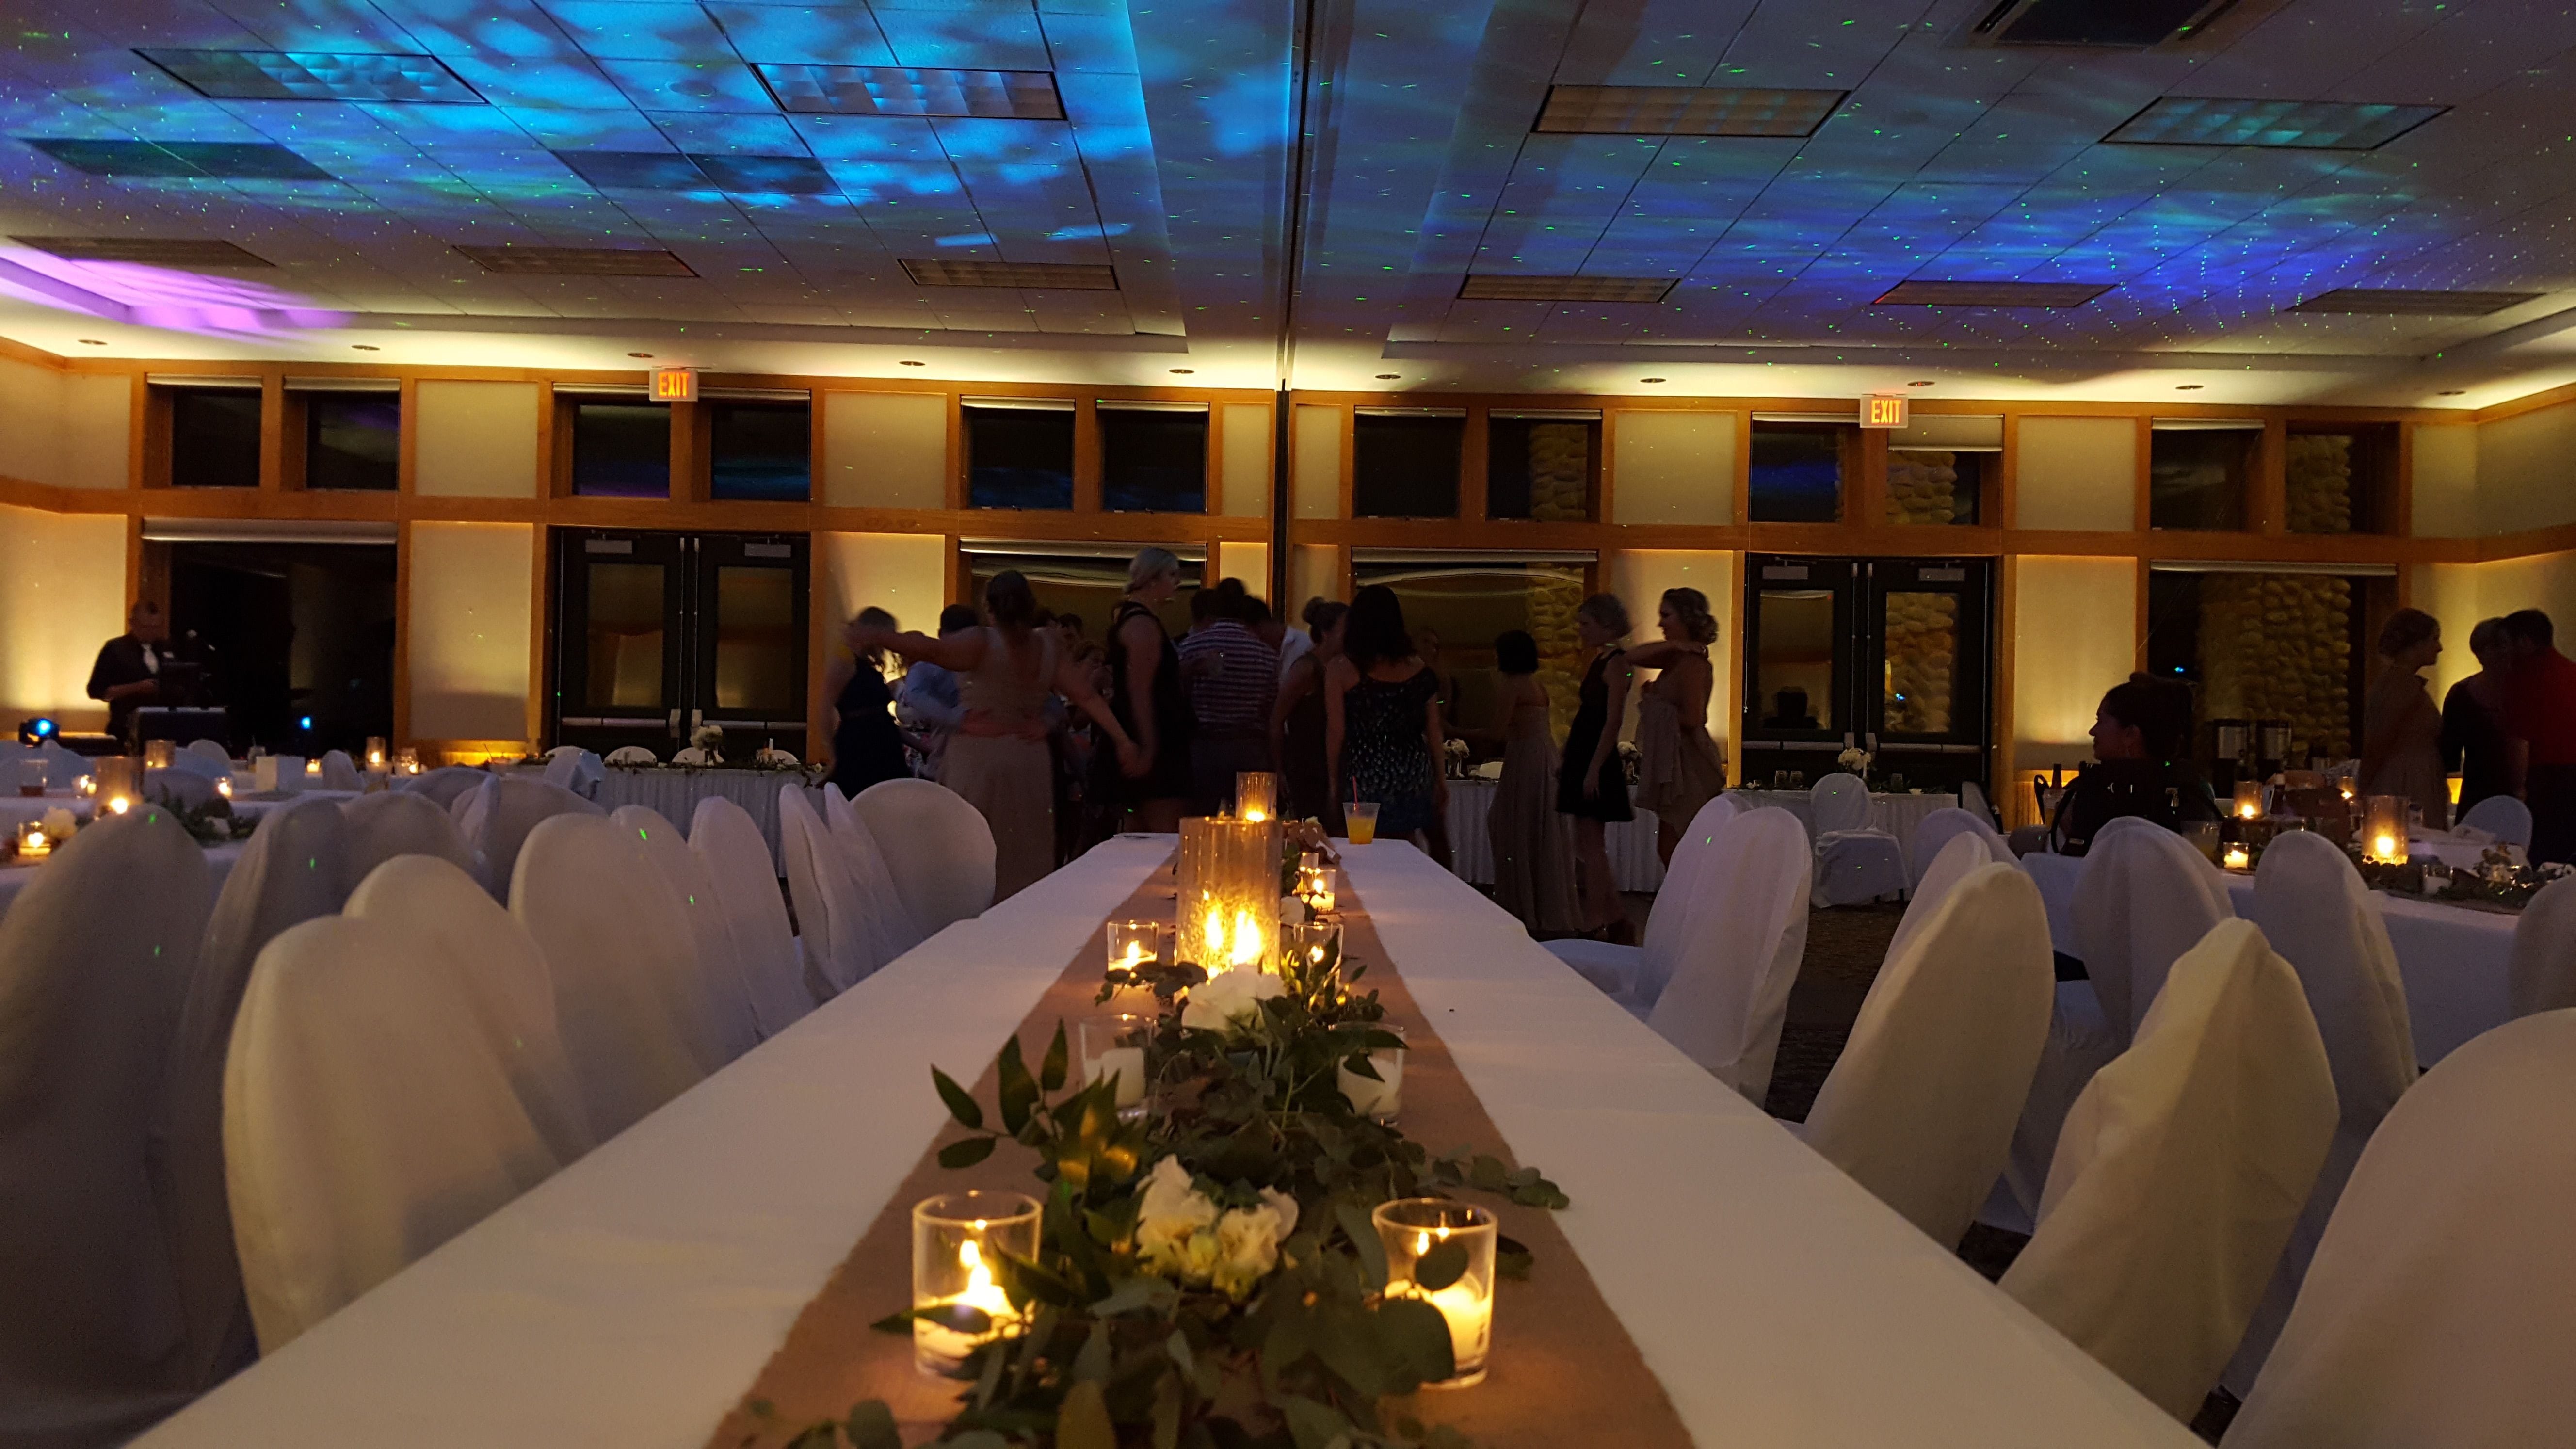 Wedding lighting at Heartwood Event Center in Trego. Up lighting in soft gold with stars and Northern Lights on the ceiling.